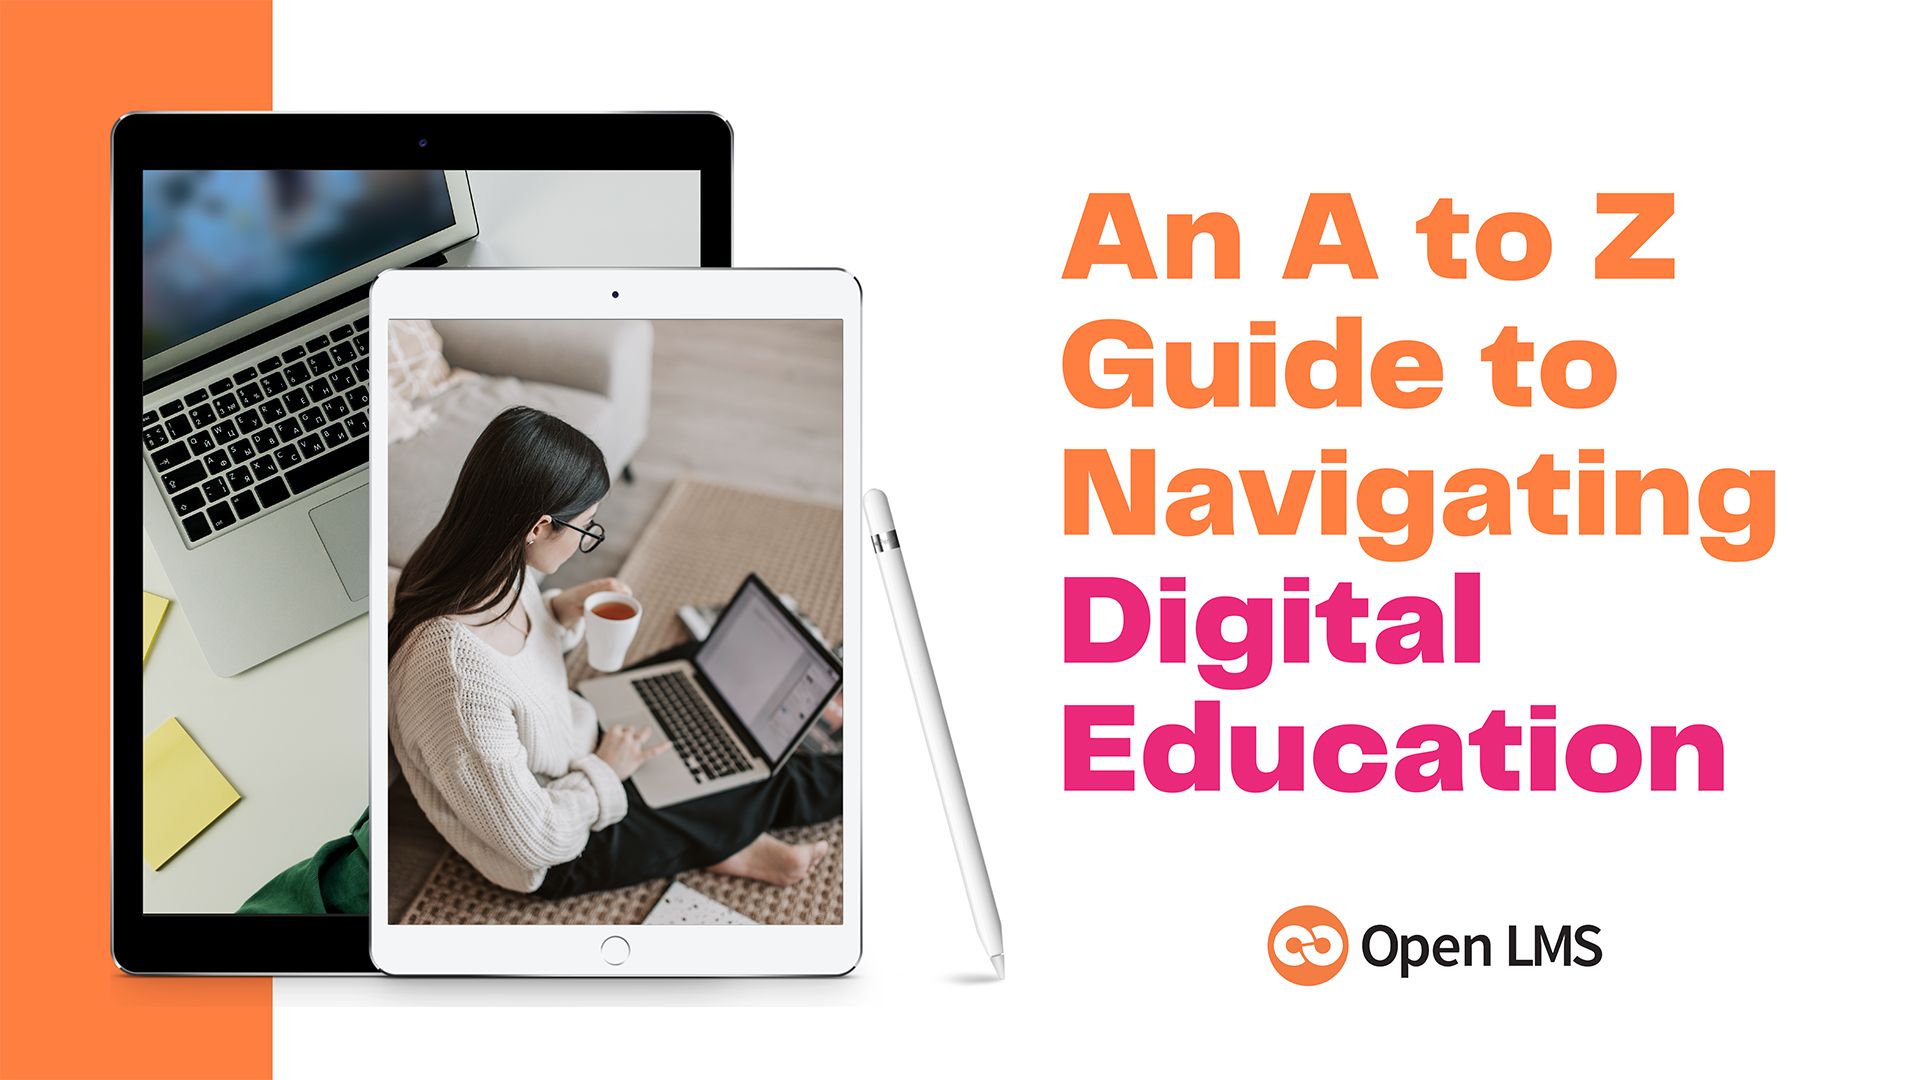 An A to Z Guide to Navigating Digital Education